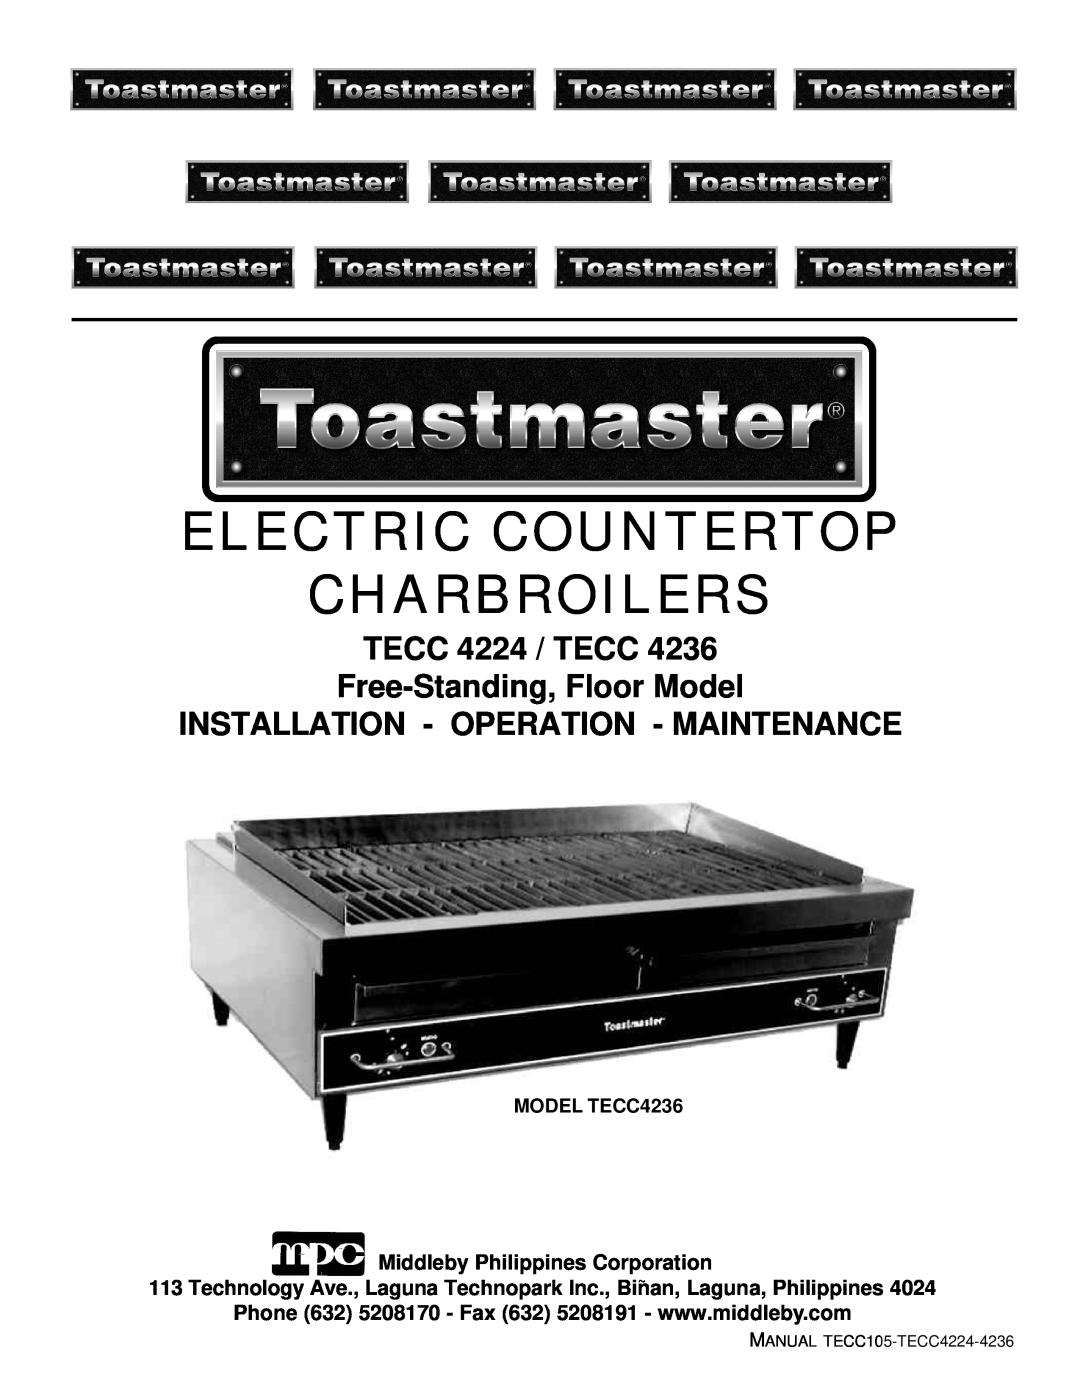 Toastmaster TECC 4224, TECC 4236 manual Middleby Philippines Corporation, Electric Countertop Charbroilers 